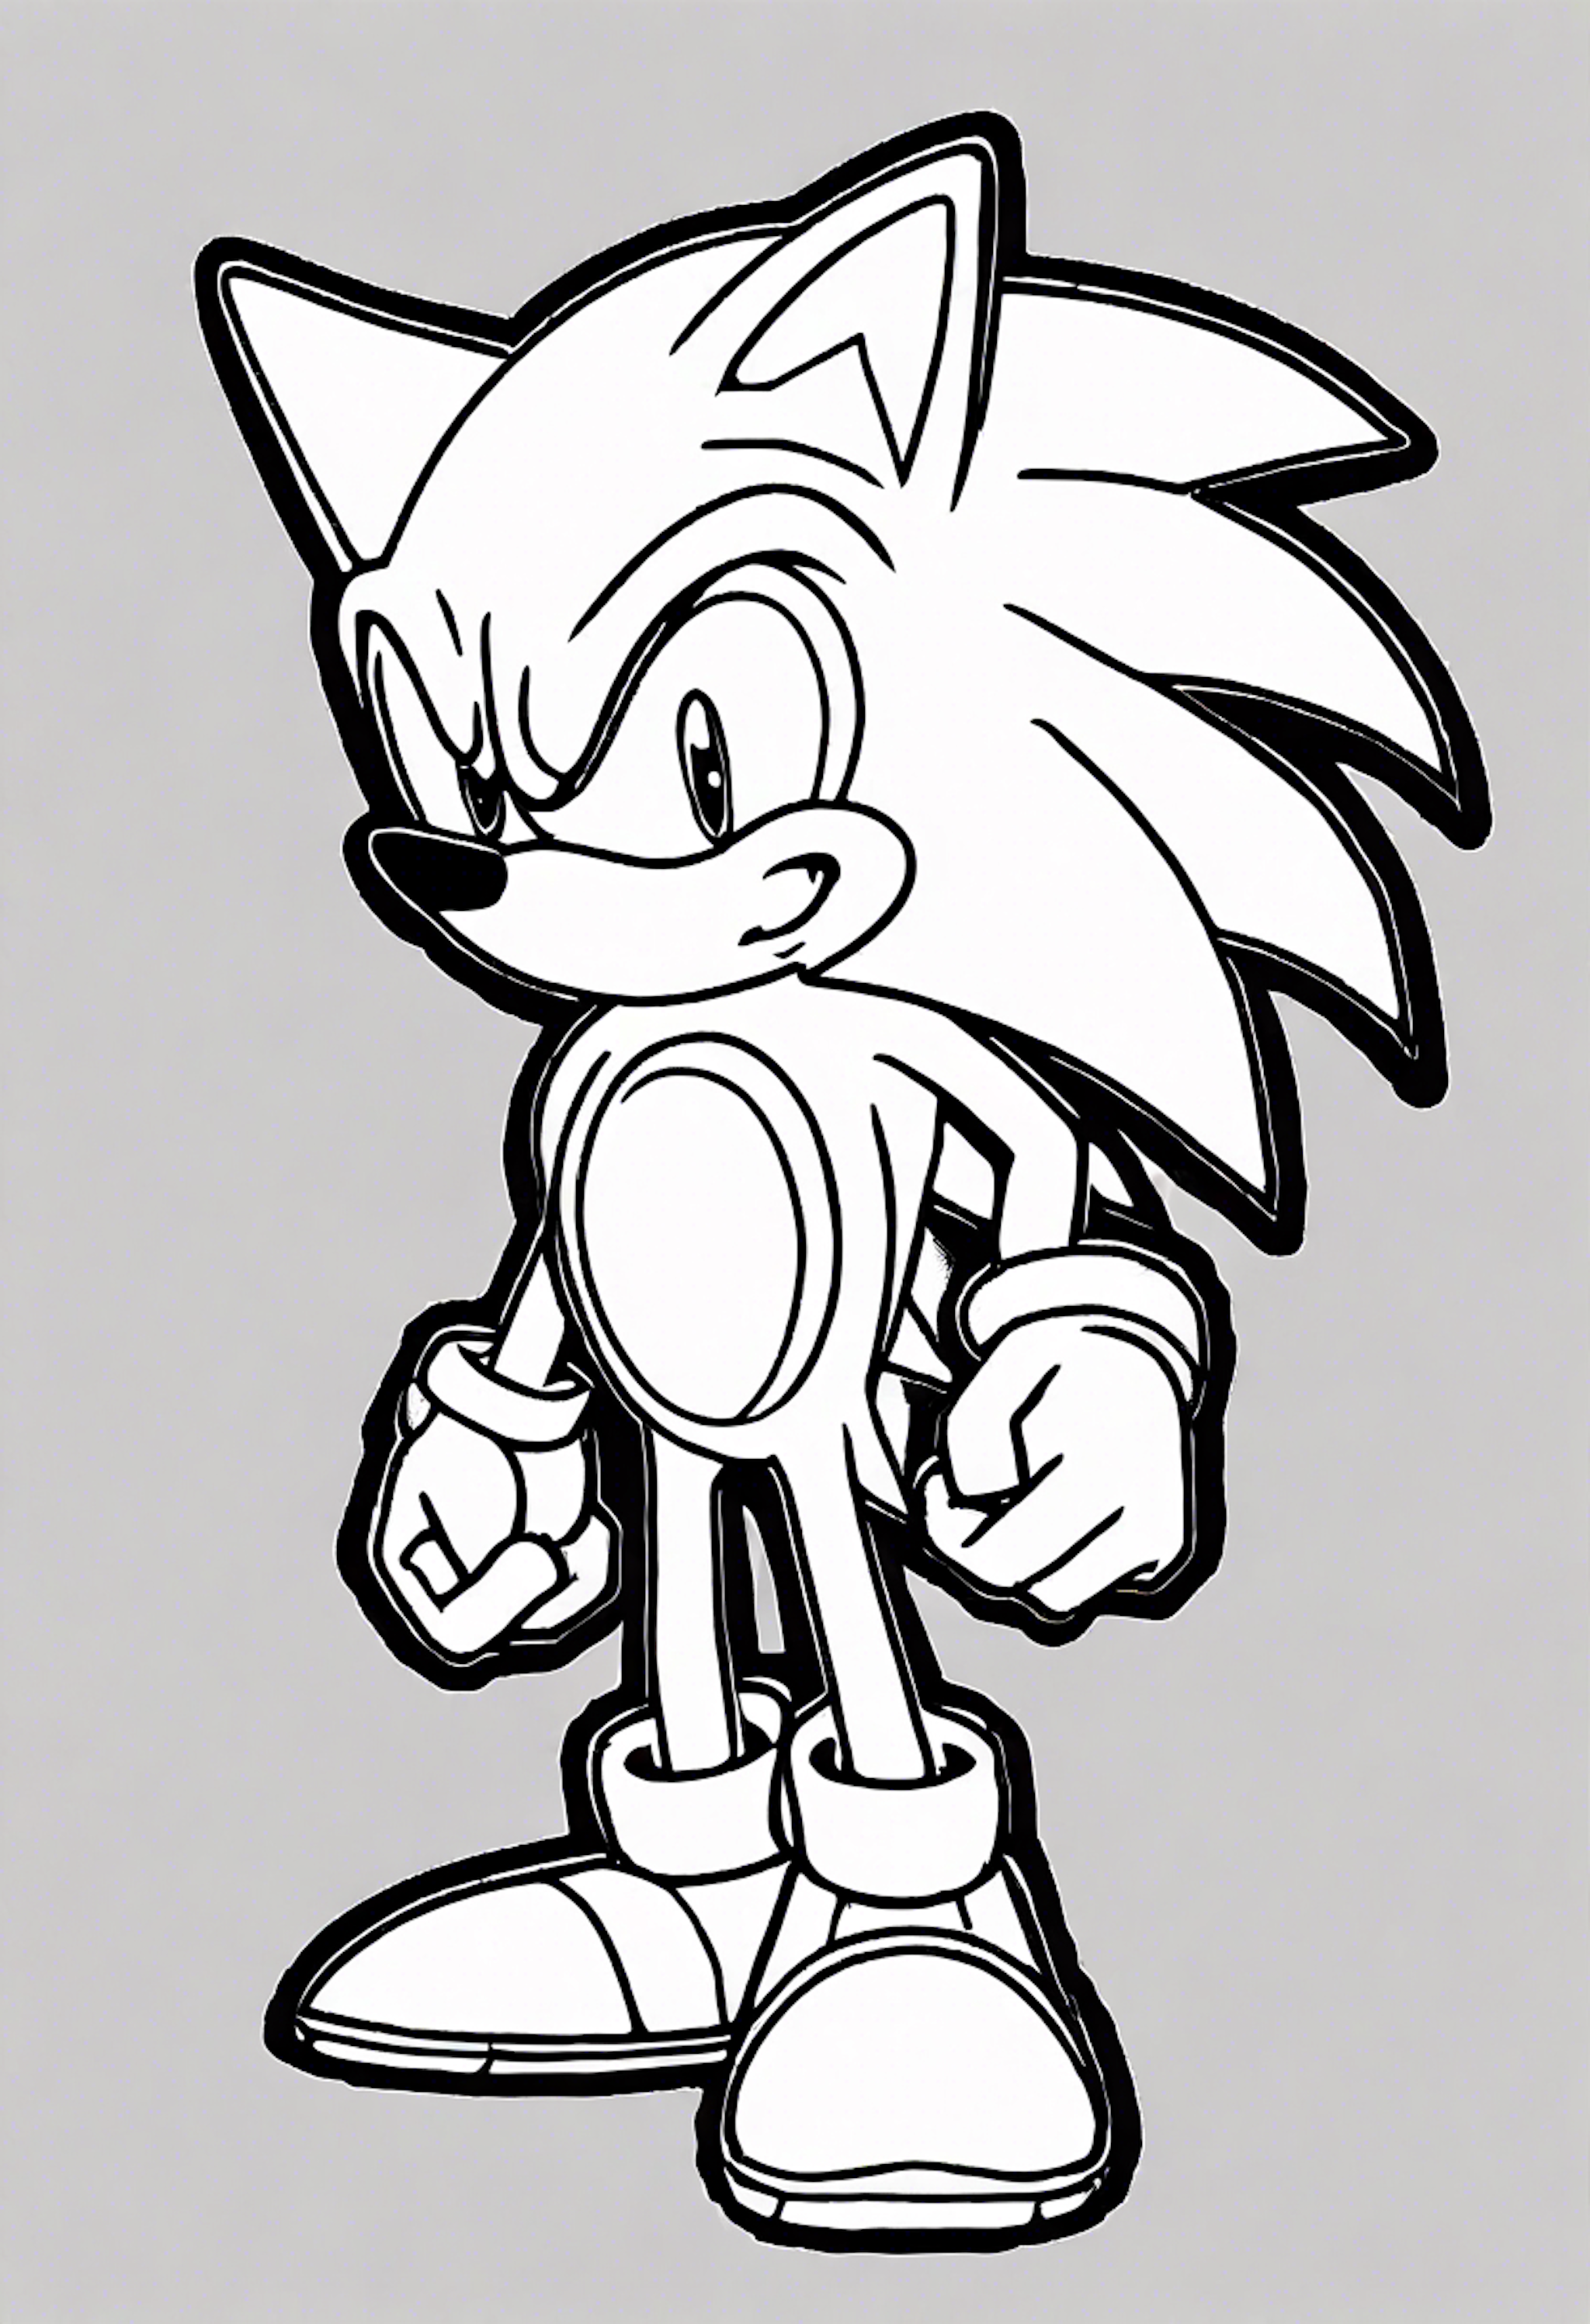 A coloring page for 1 Sonic coloring pages